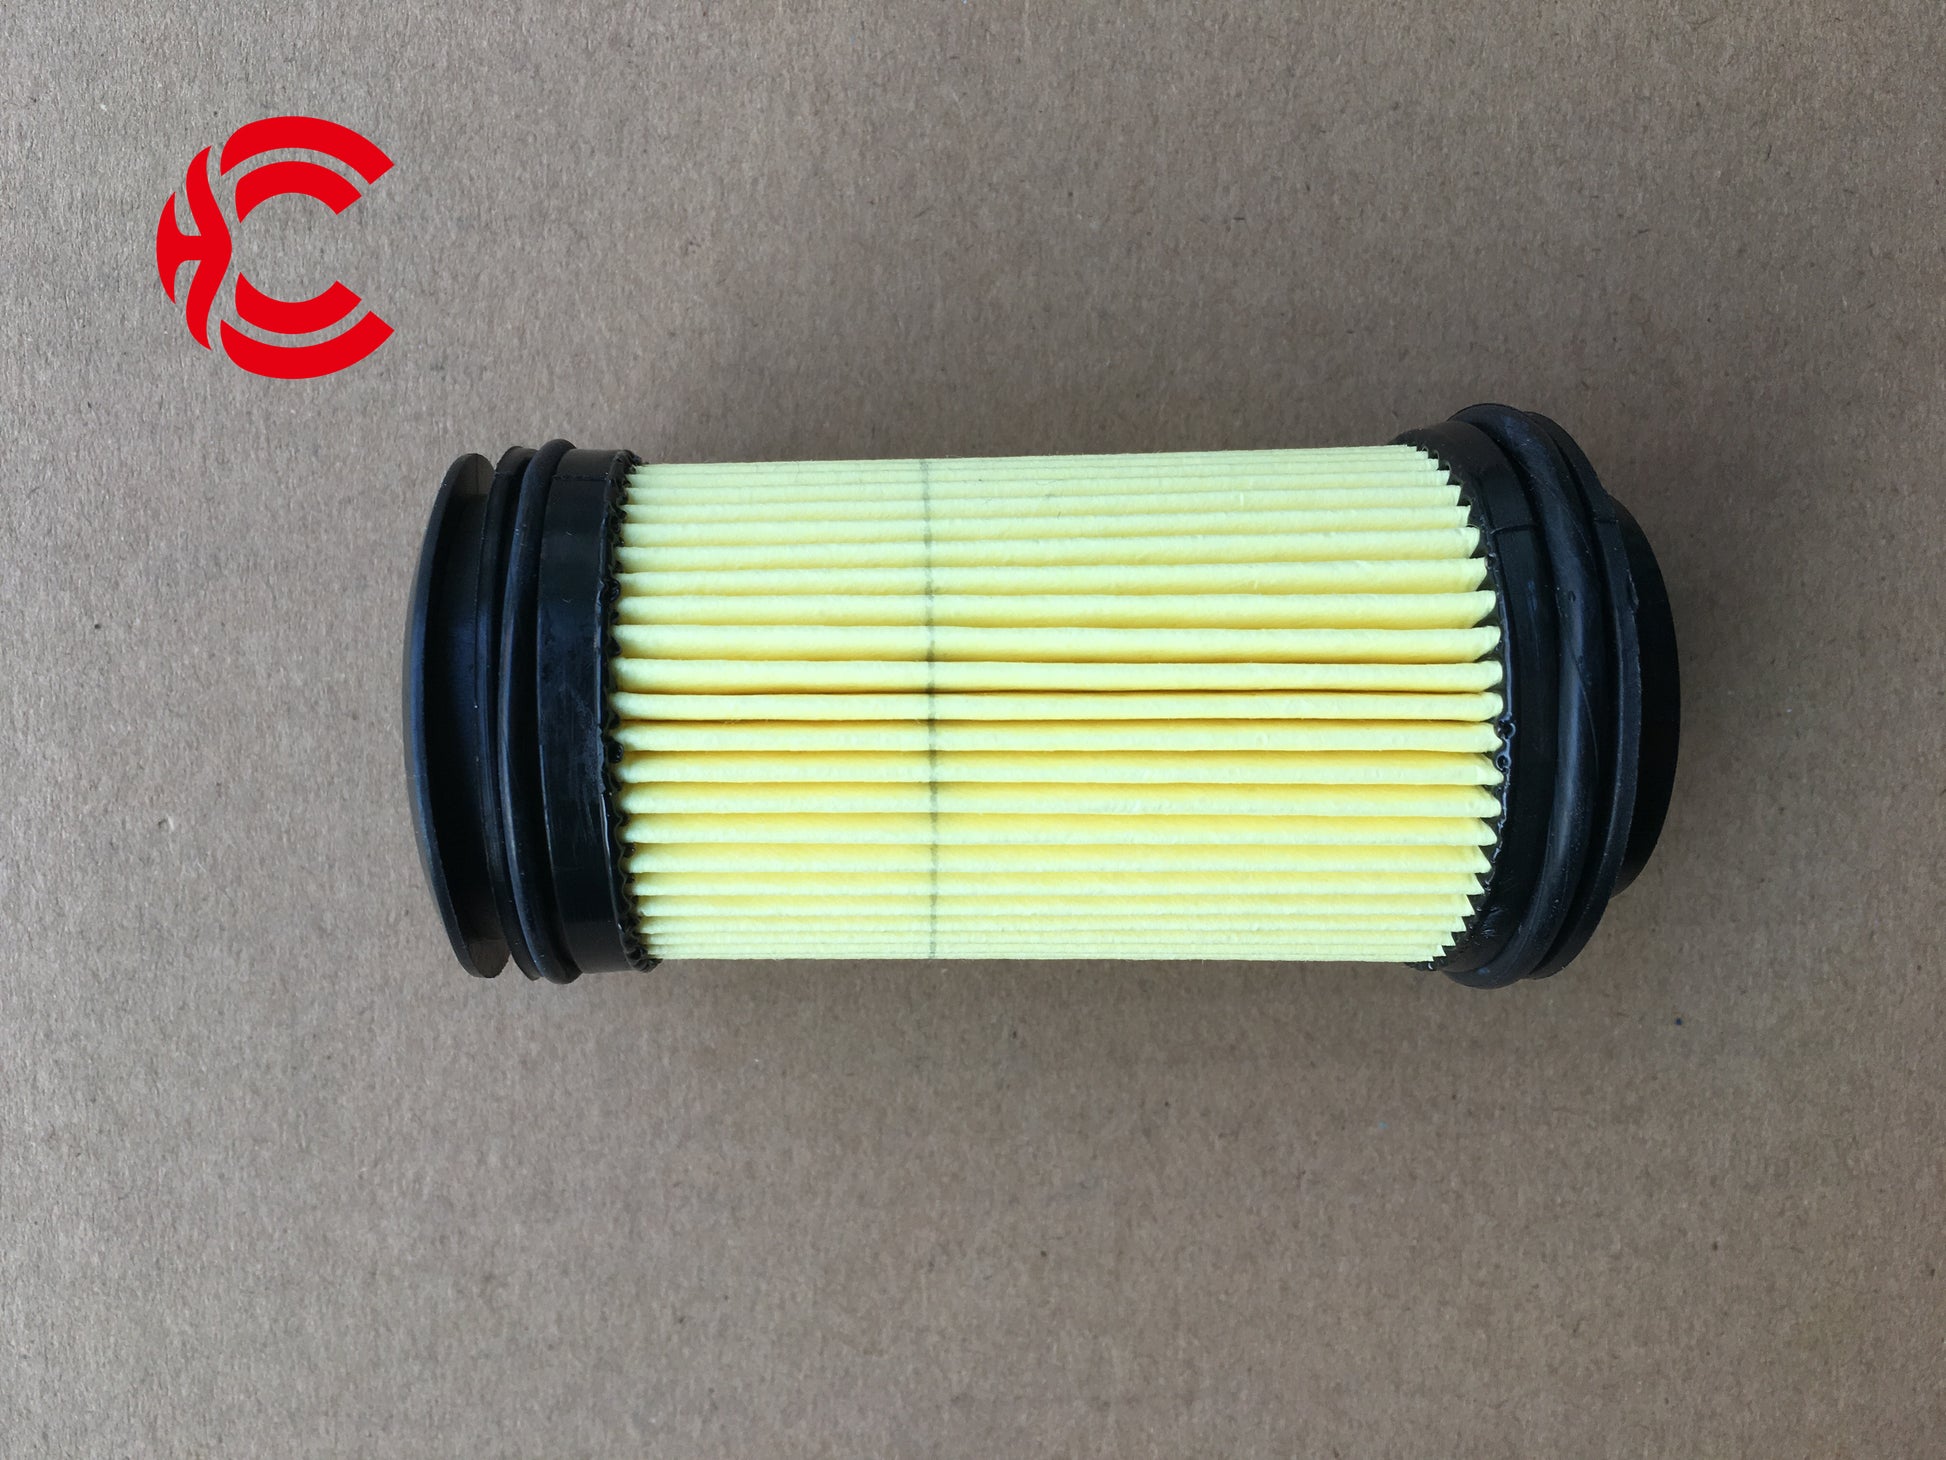 OEM: BOSCH6.5Material: ABS metalColor: black silverOrigin: Made in ChinaWeight: 100gPacking List: 1* Adblue/Urea Filter More ServiceWe can provide OEM Manufacturing serviceWe can Be your one-step solution for Auto PartsWe can provide technical scheme for you Feel Free to Contact Us, We will get back to you as soon as possible.